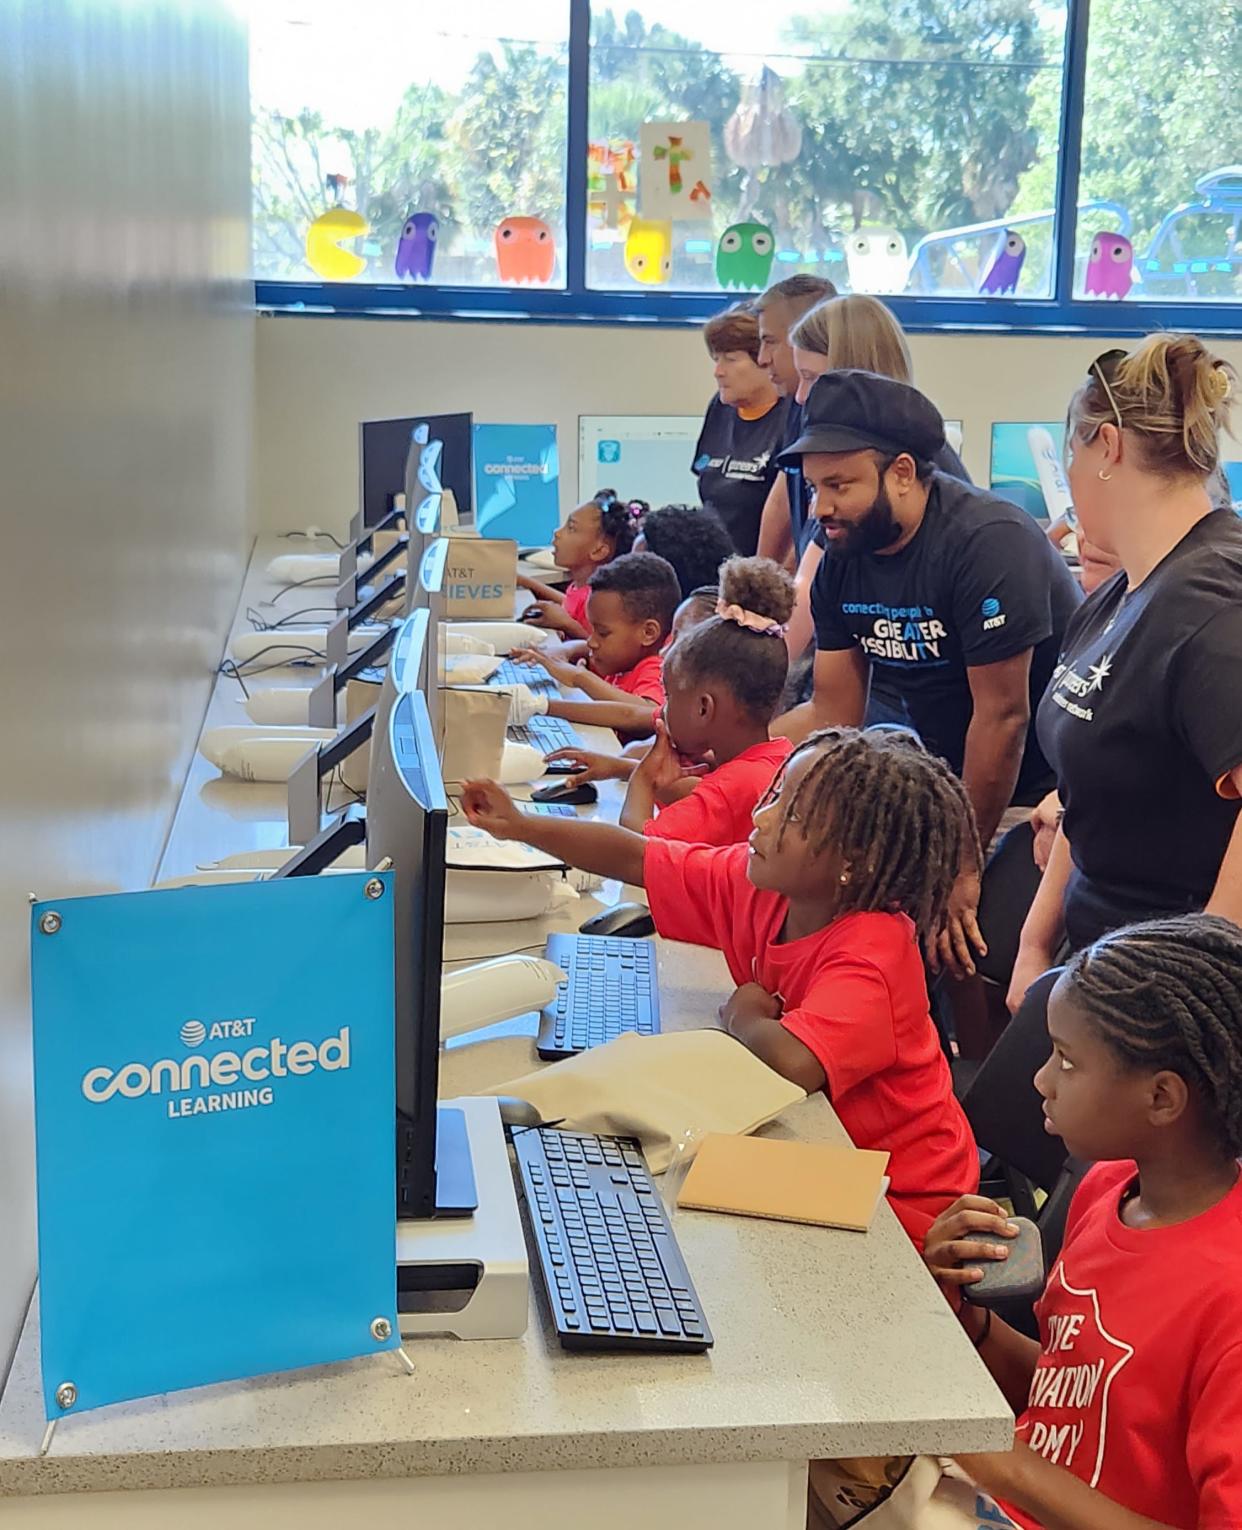 Employees of AT&T are shown volunteering at the company's new Connected Learning Center in West Palm Beach. Opened in March, this is AT&T's first such facility created as part of its commitment to bridging the digital divide.